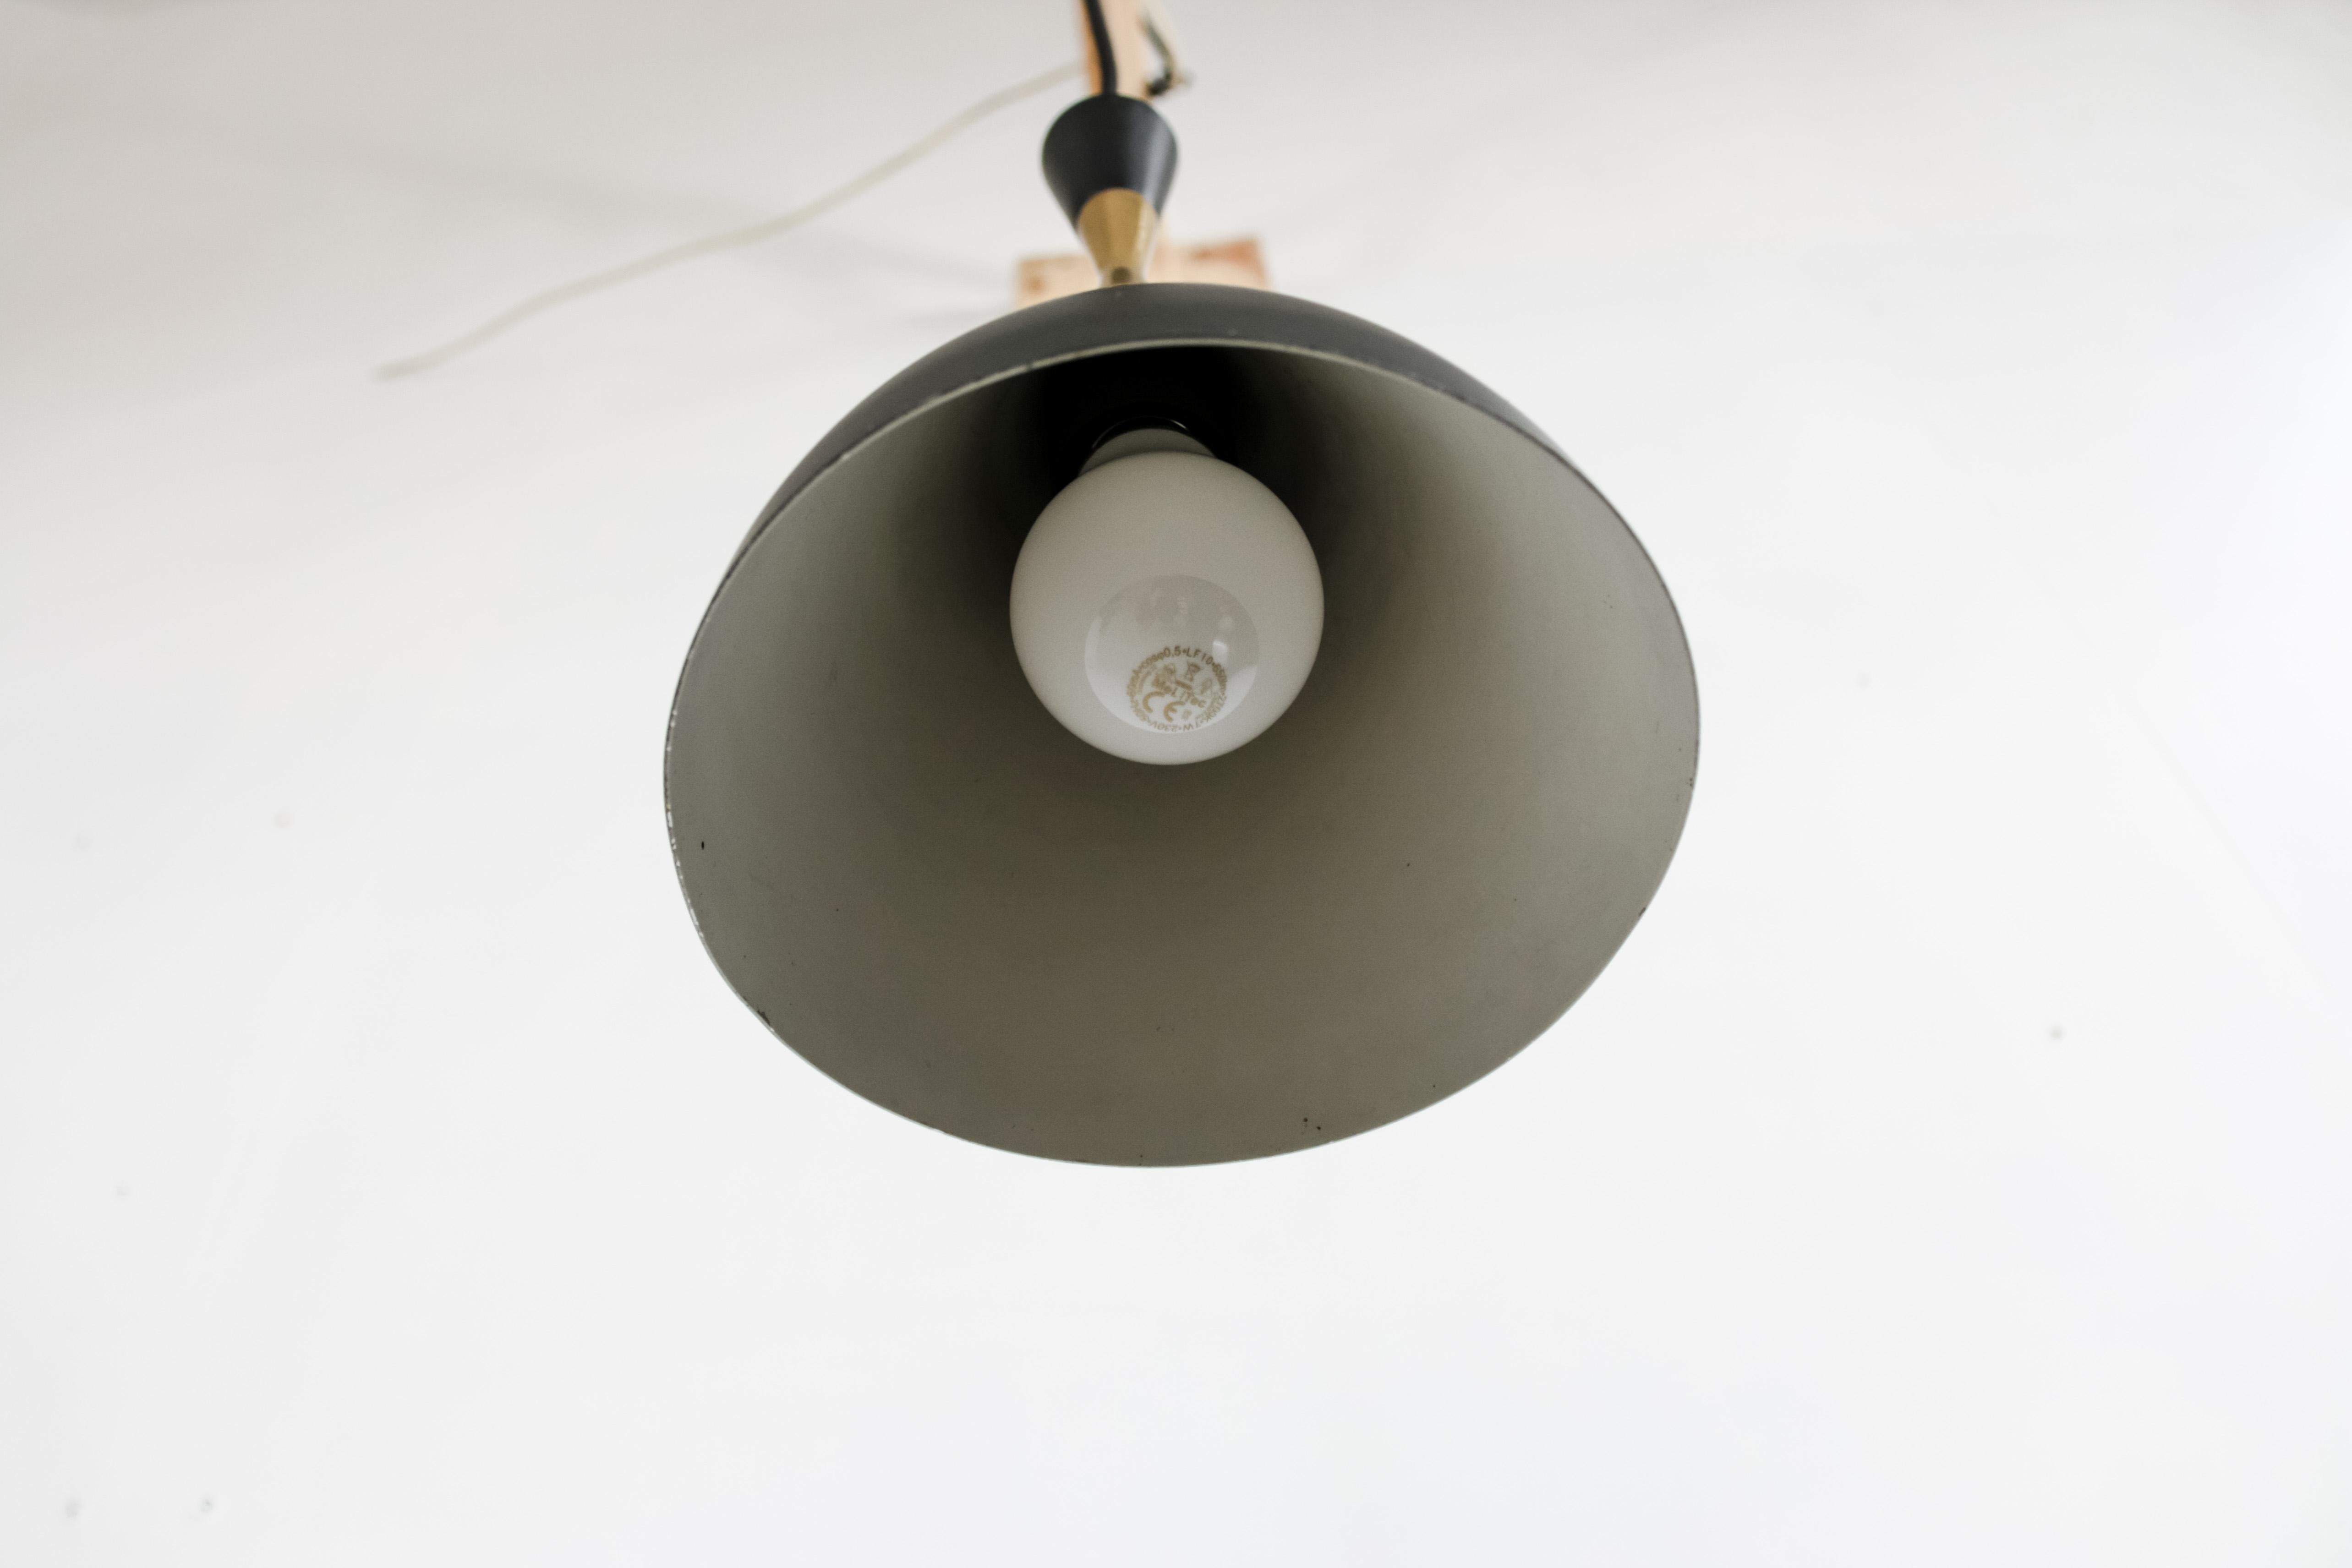 Mid-20th Century Diavolo Pendant Lamp by Svend Aage Holm Sorensen for Holm Sorensen & Co For Sale